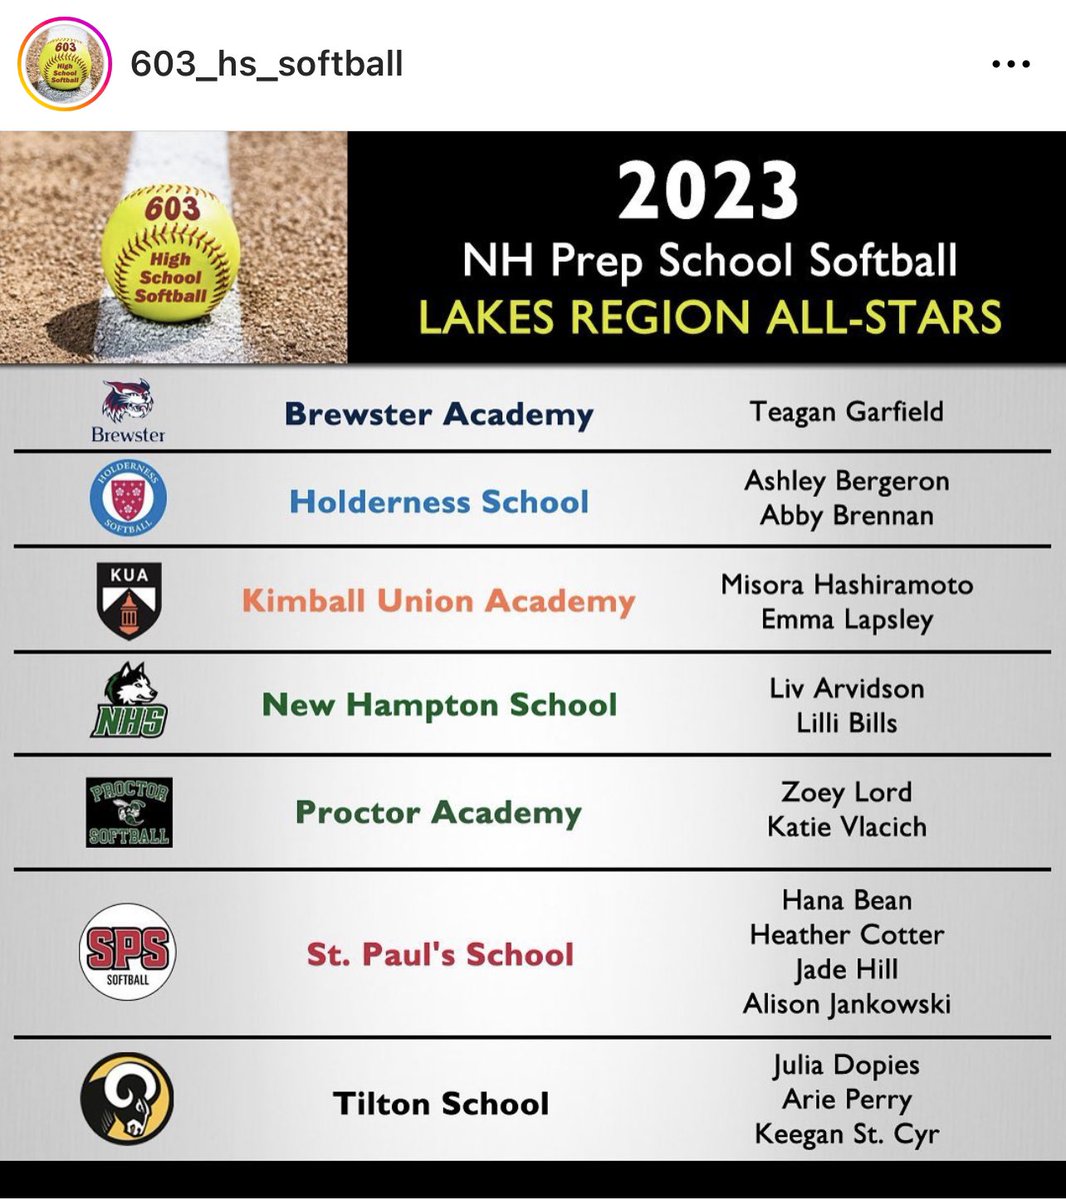 Excited to be named to the 2023 All-NEPSAC Honorable Mention & Lakes Region All-Star lists! @NEPSAC @HoldernessSball @TeamHolderness @gselitesoftball